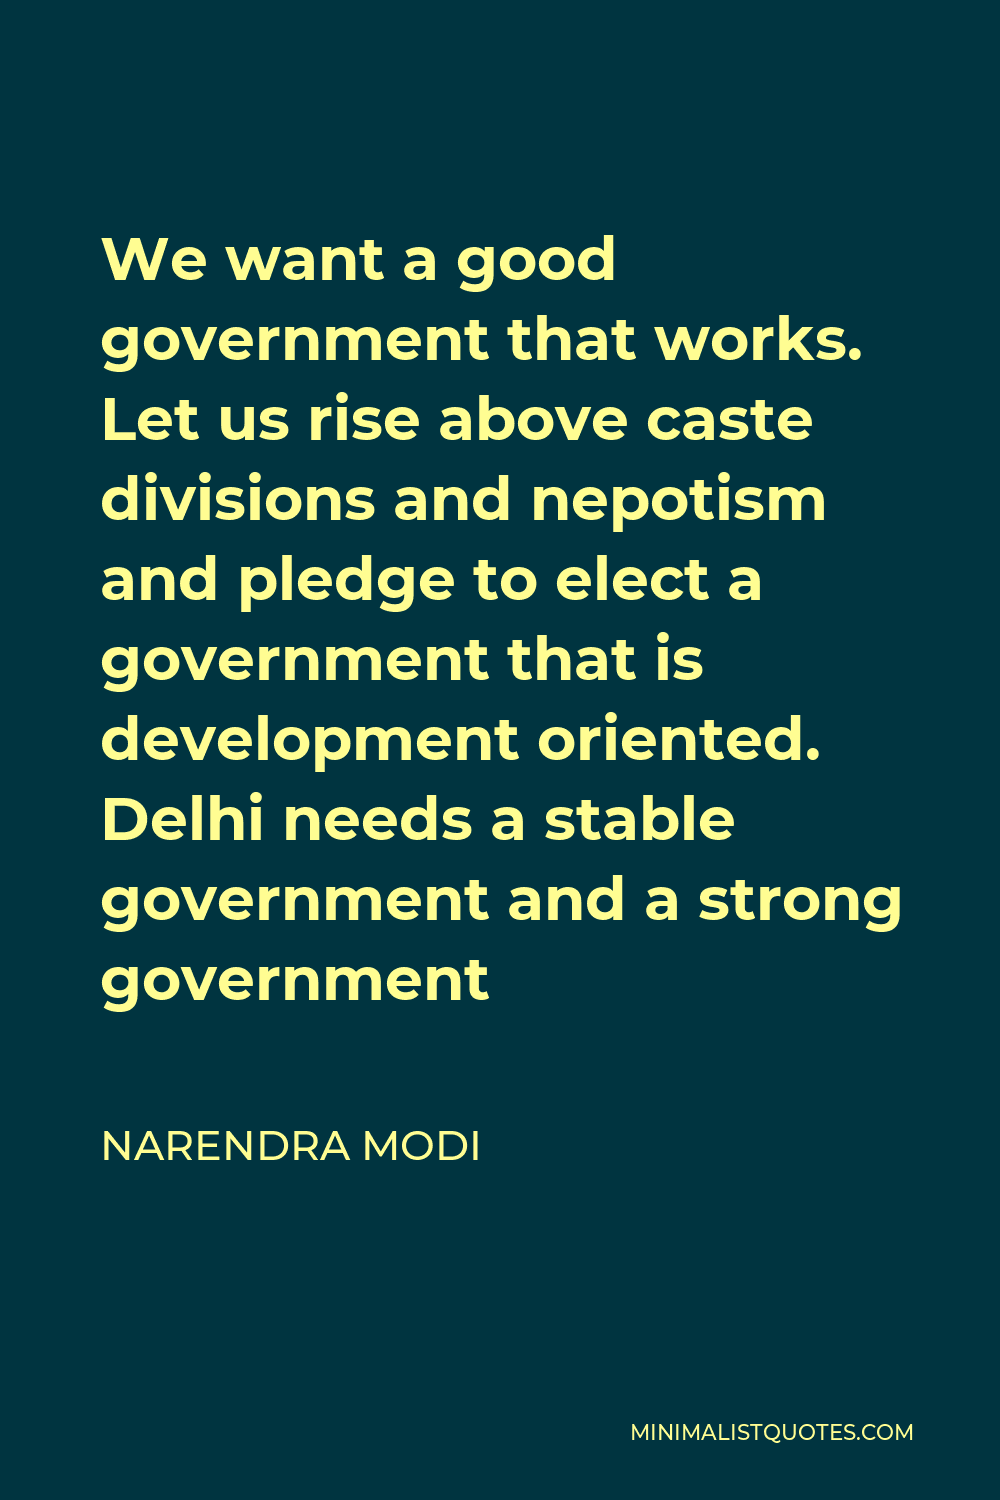 Narendra Modi Quote - We want a good government that works. Let us rise above caste divisions and nepotism and pledge to elect a government that is development oriented. Delhi needs a stable government and a strong government